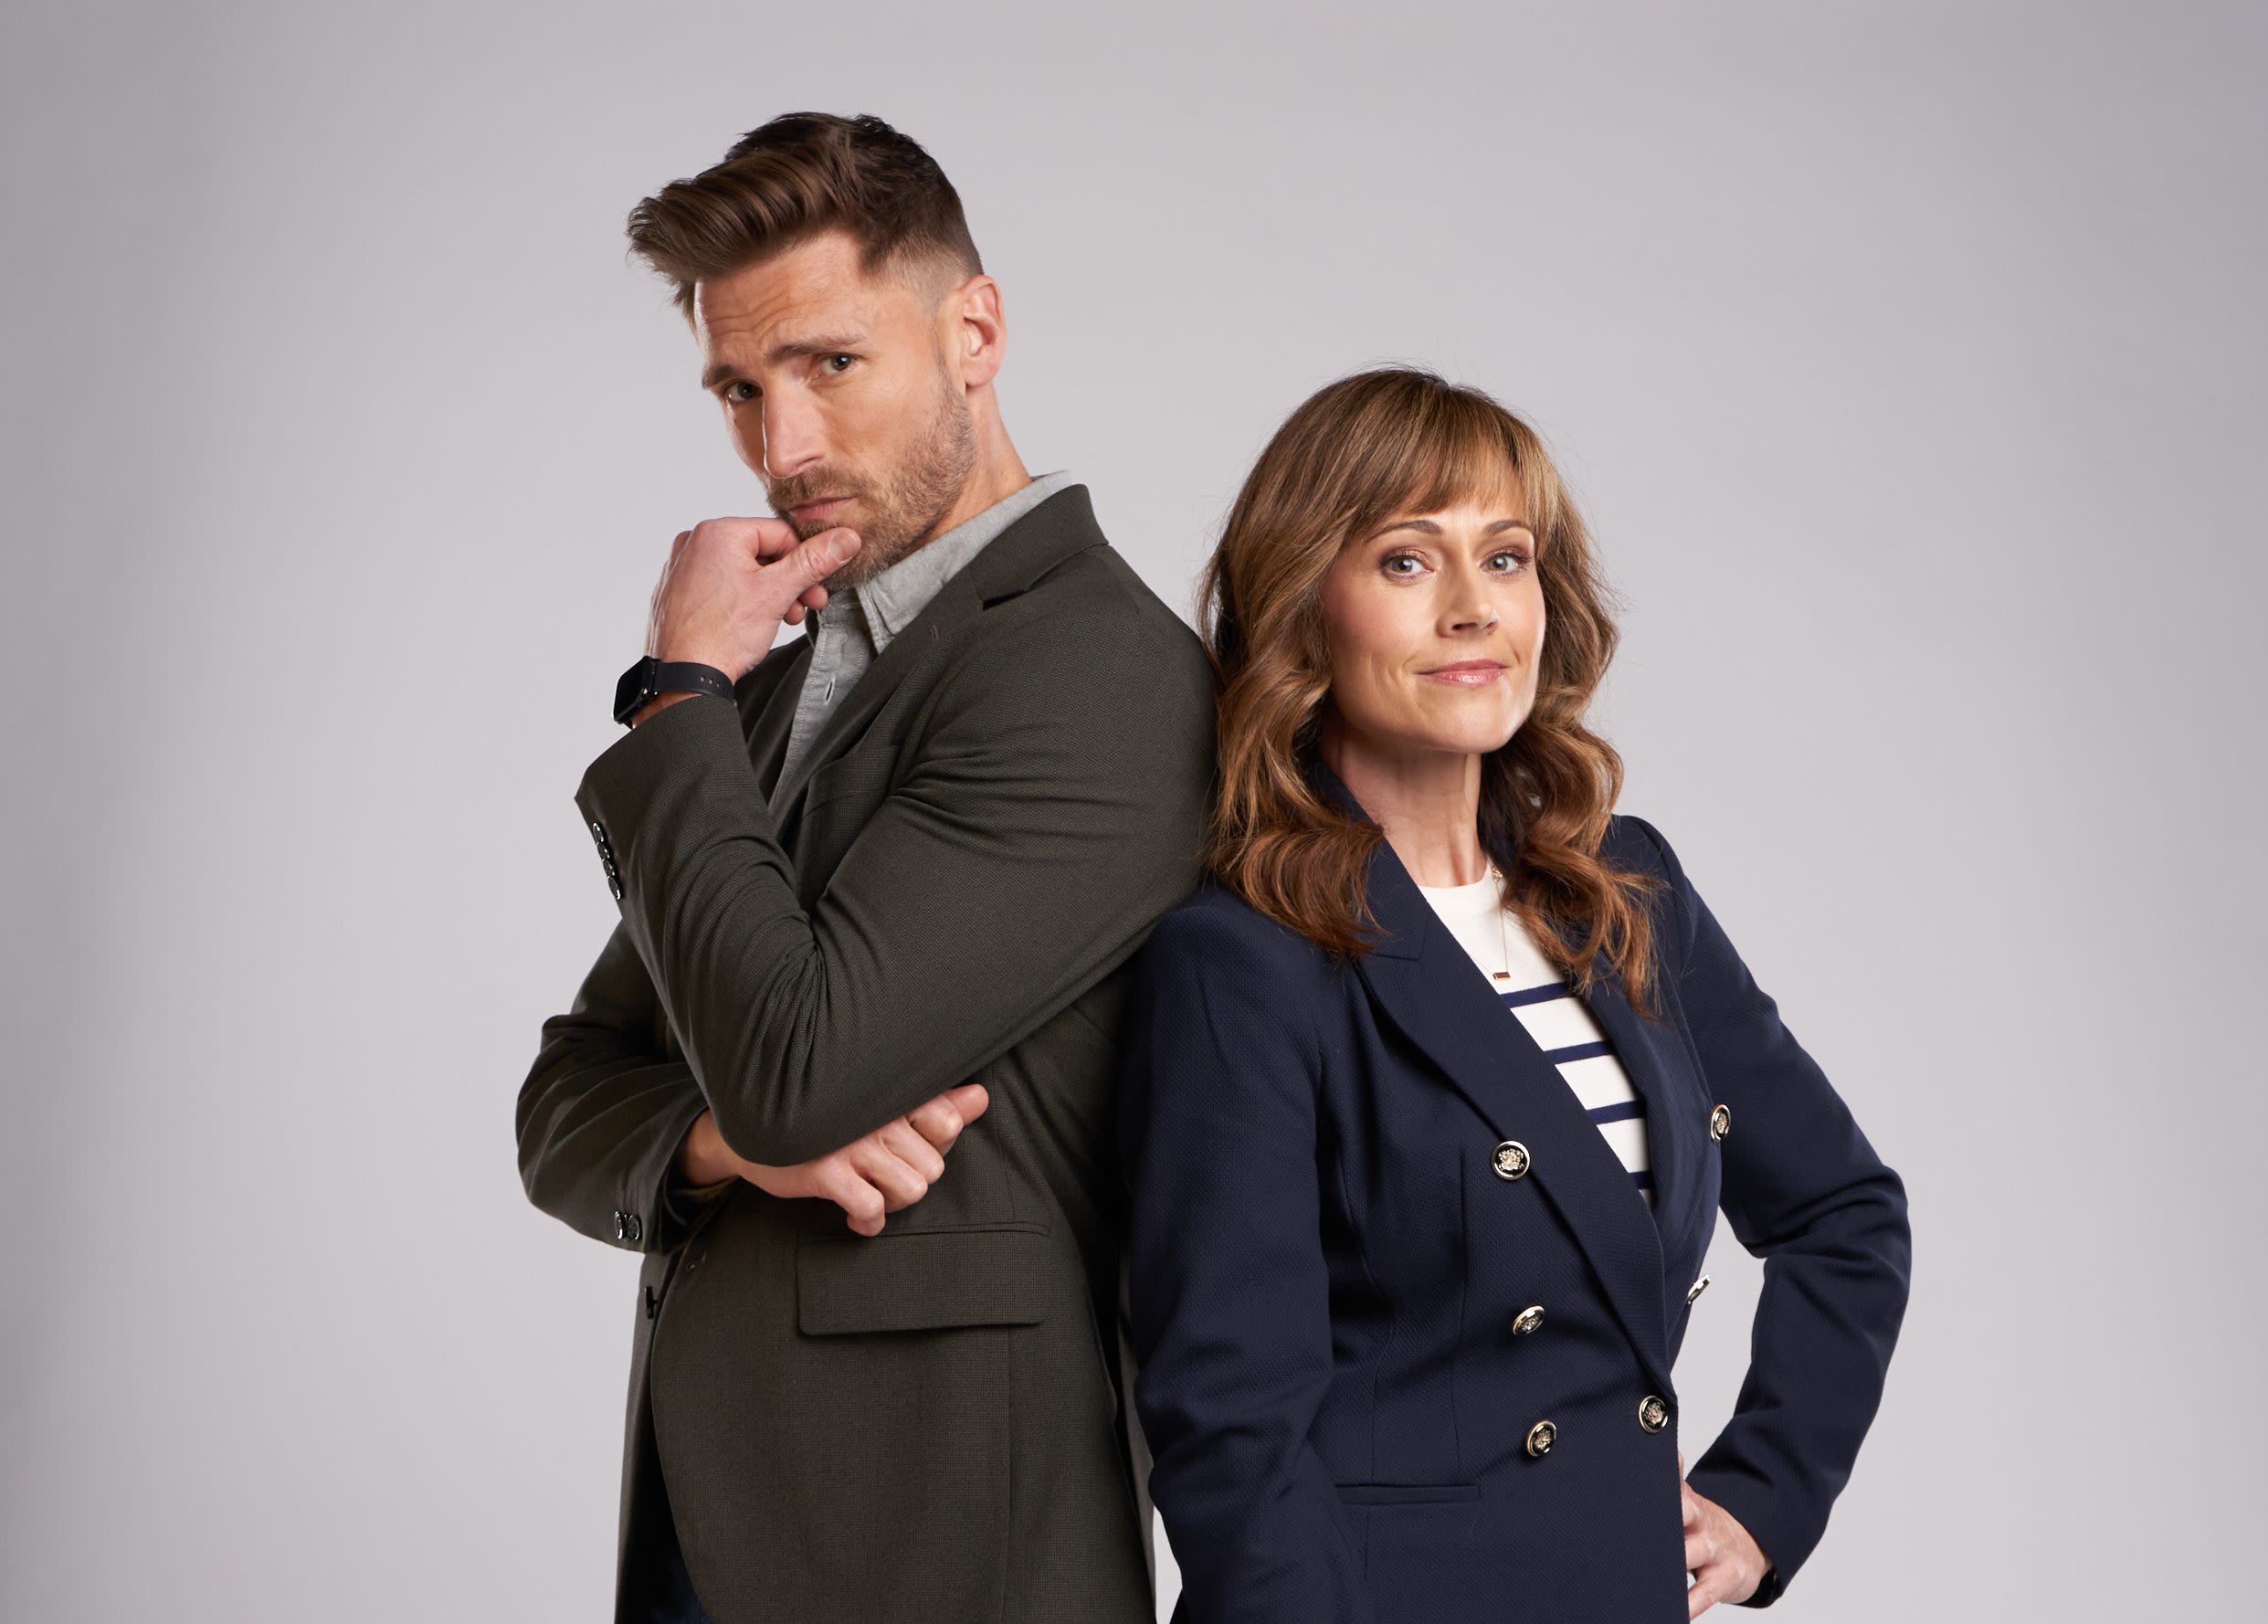 Hallmark Franchise ‘Curious Caterers’ Returns For Fifth Installment With Stars Nikki Deloach & Andrew Walker